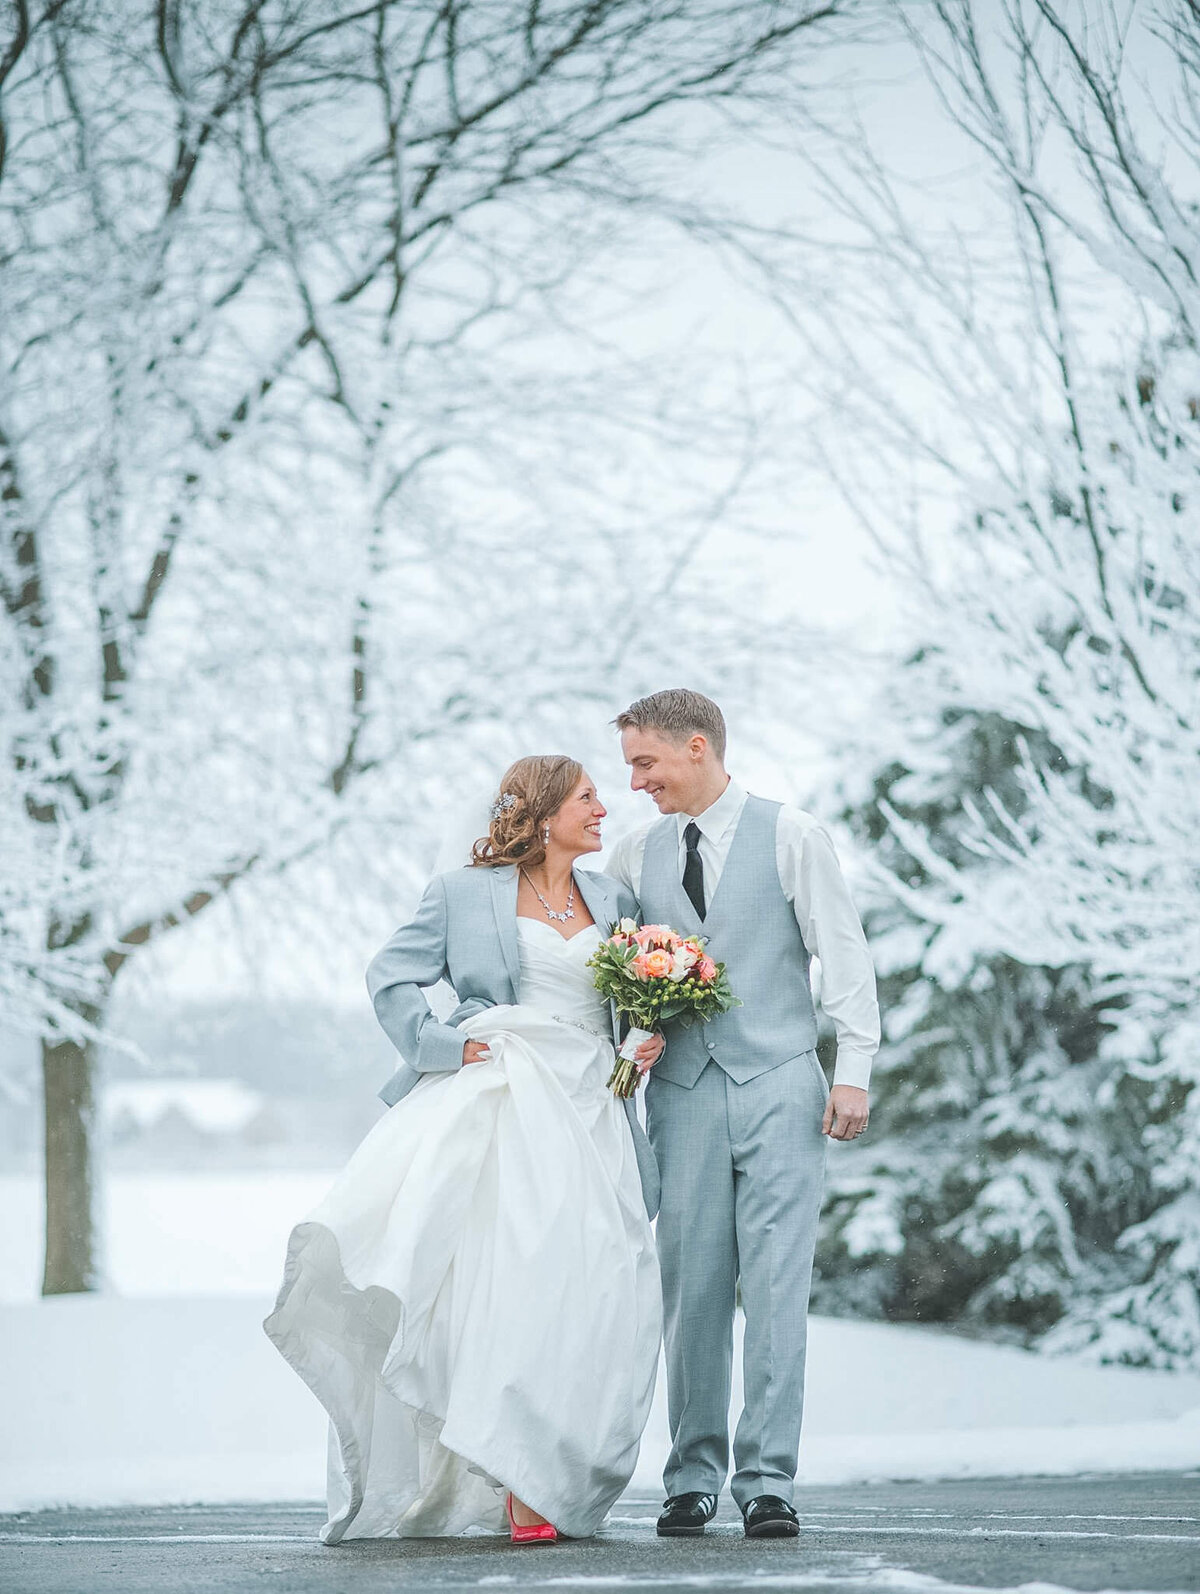 A bride and groom walking in the snow at their winter wedding with a Grand Rapids wedding photographer